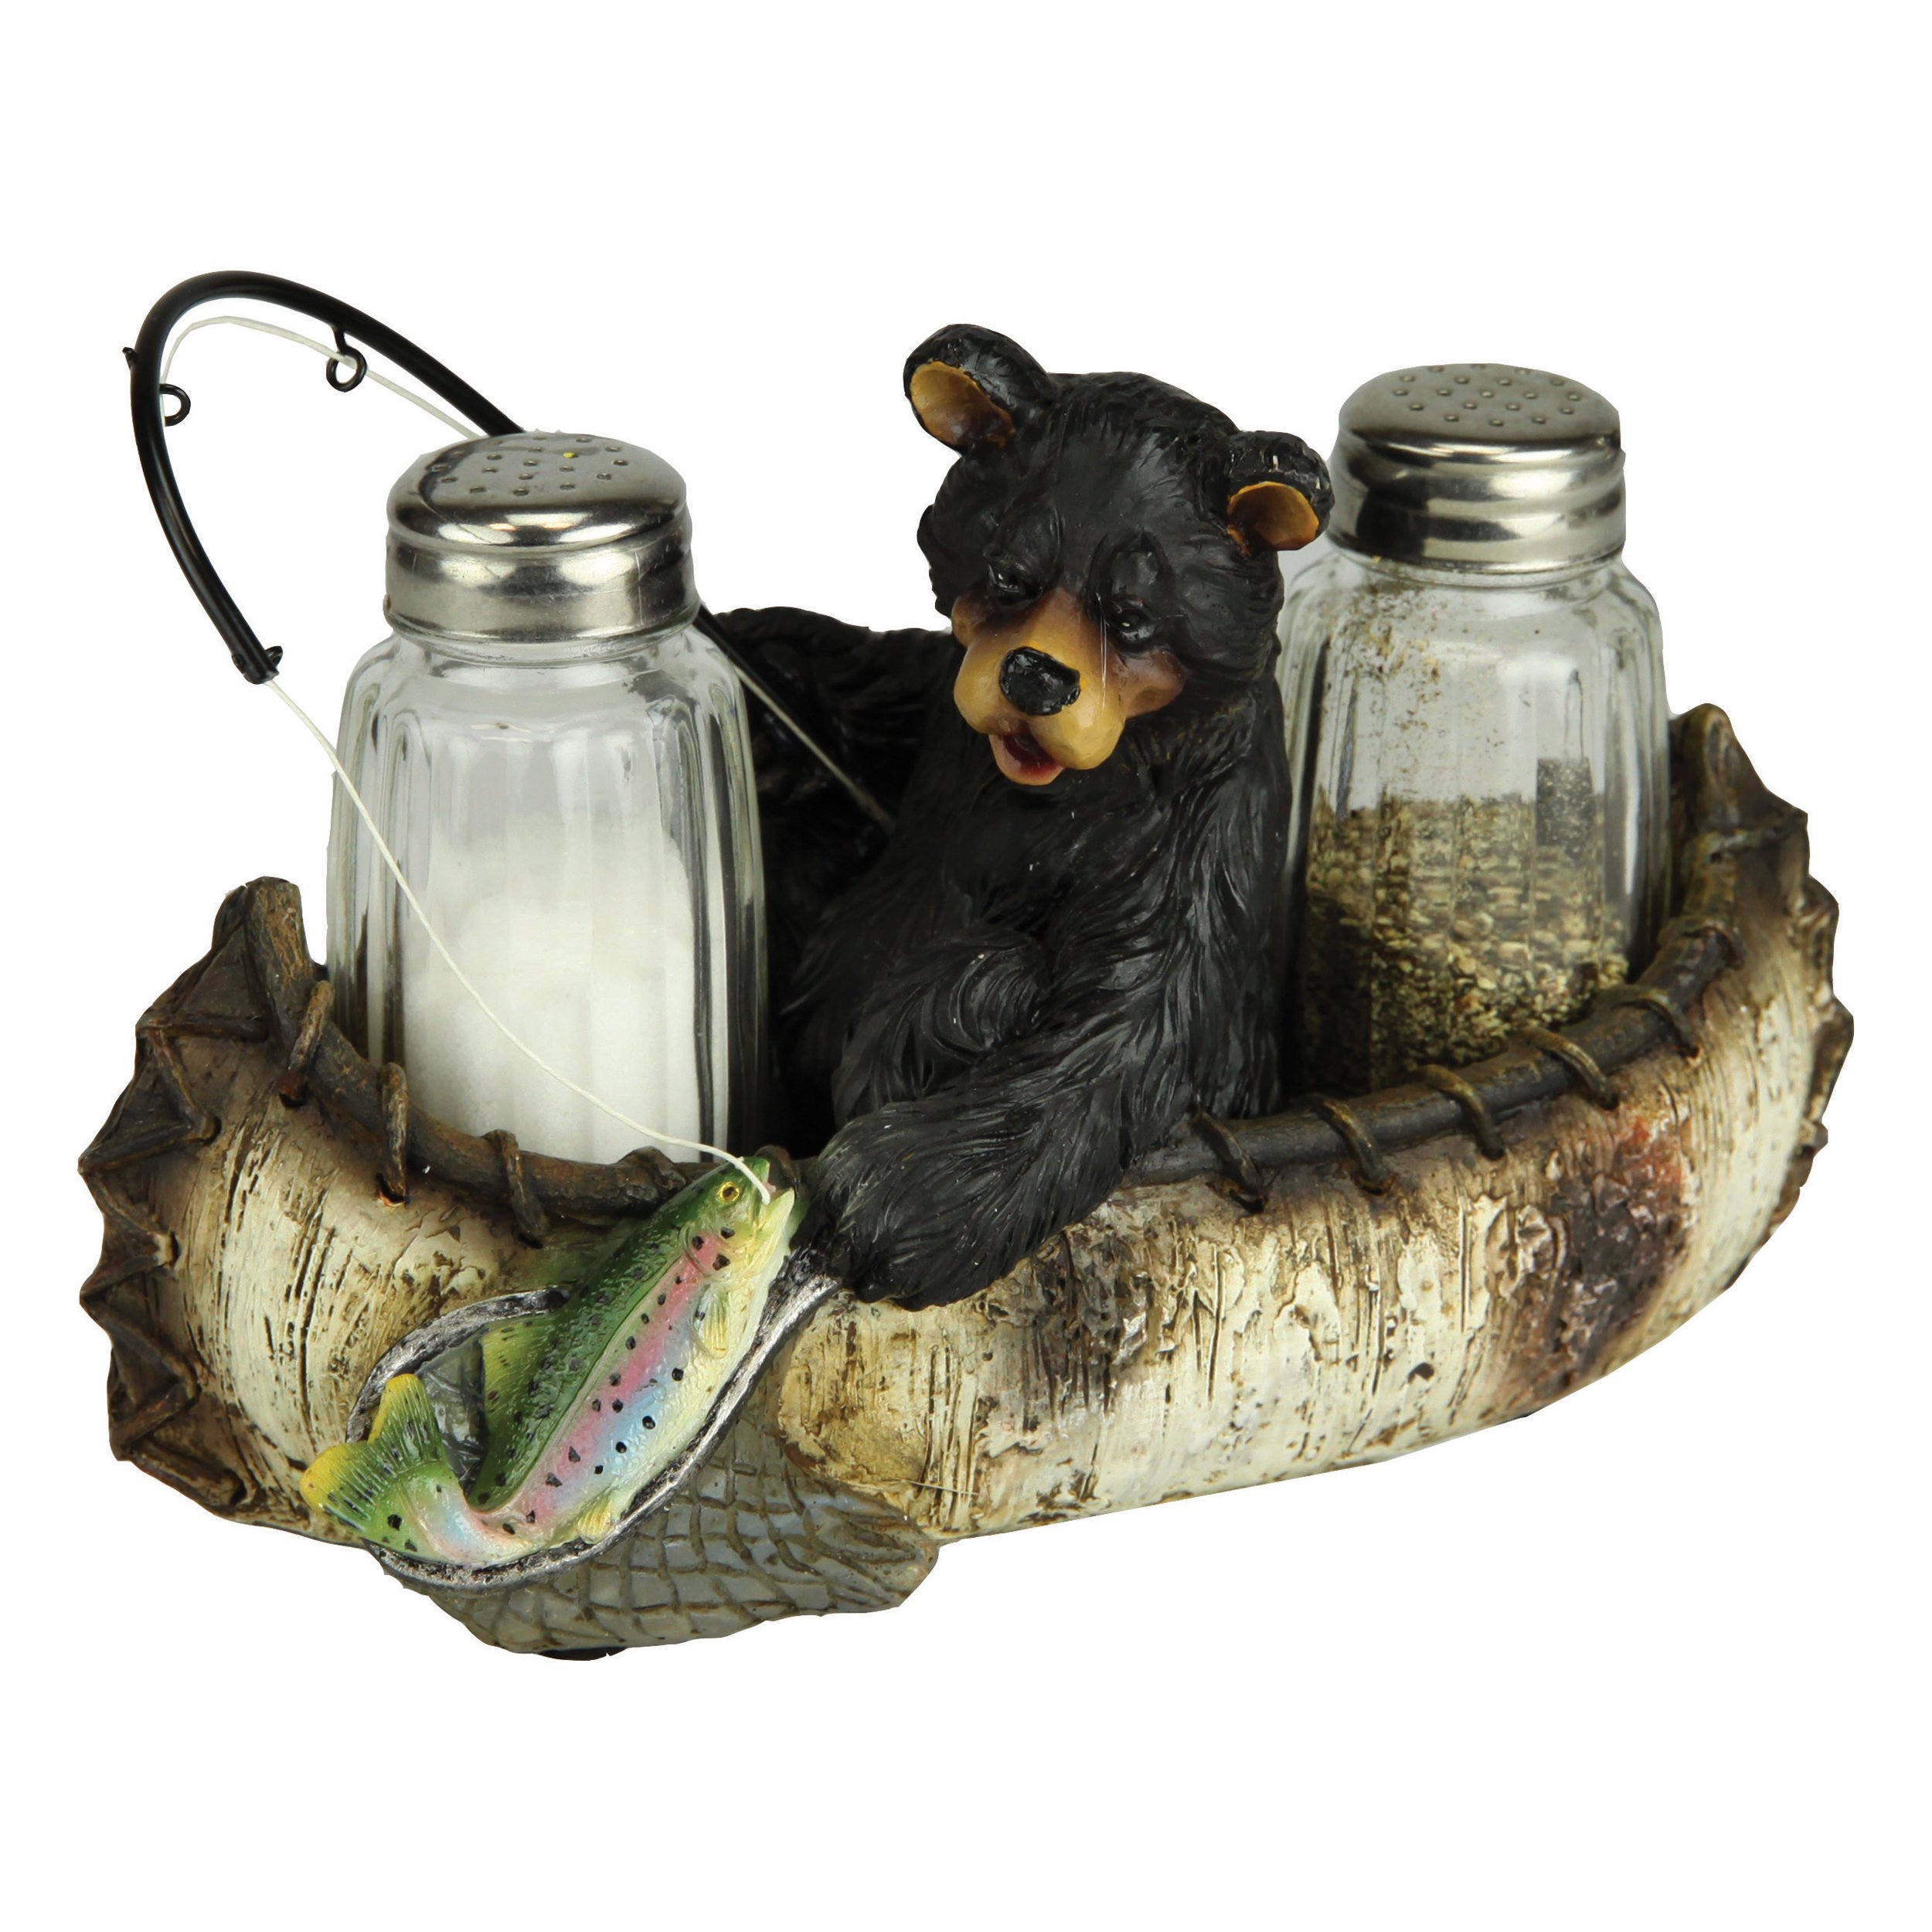 6 1/2 Inch Two Fishing Moose in Canoe Salt and Pepper Shaker Holder Shakers Included